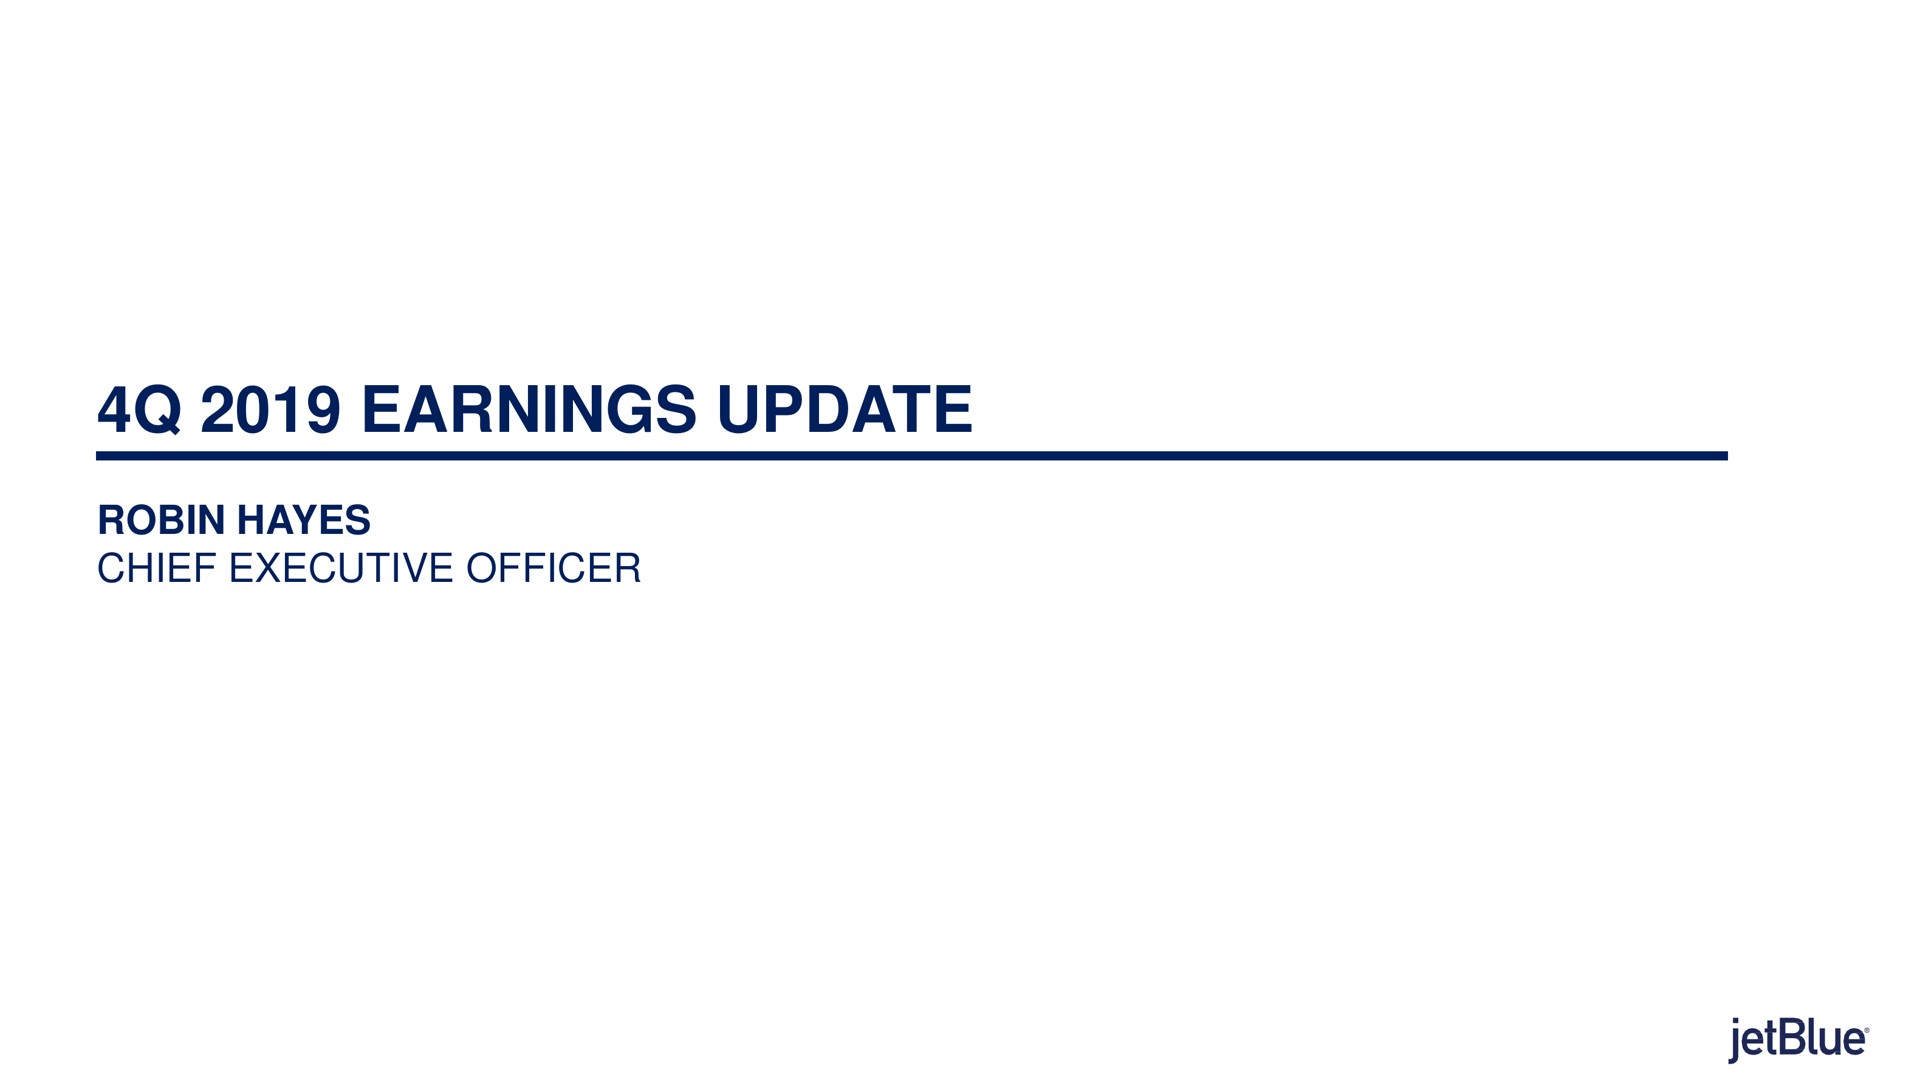 earnings update robin hayes chief executive officer | jetBlue